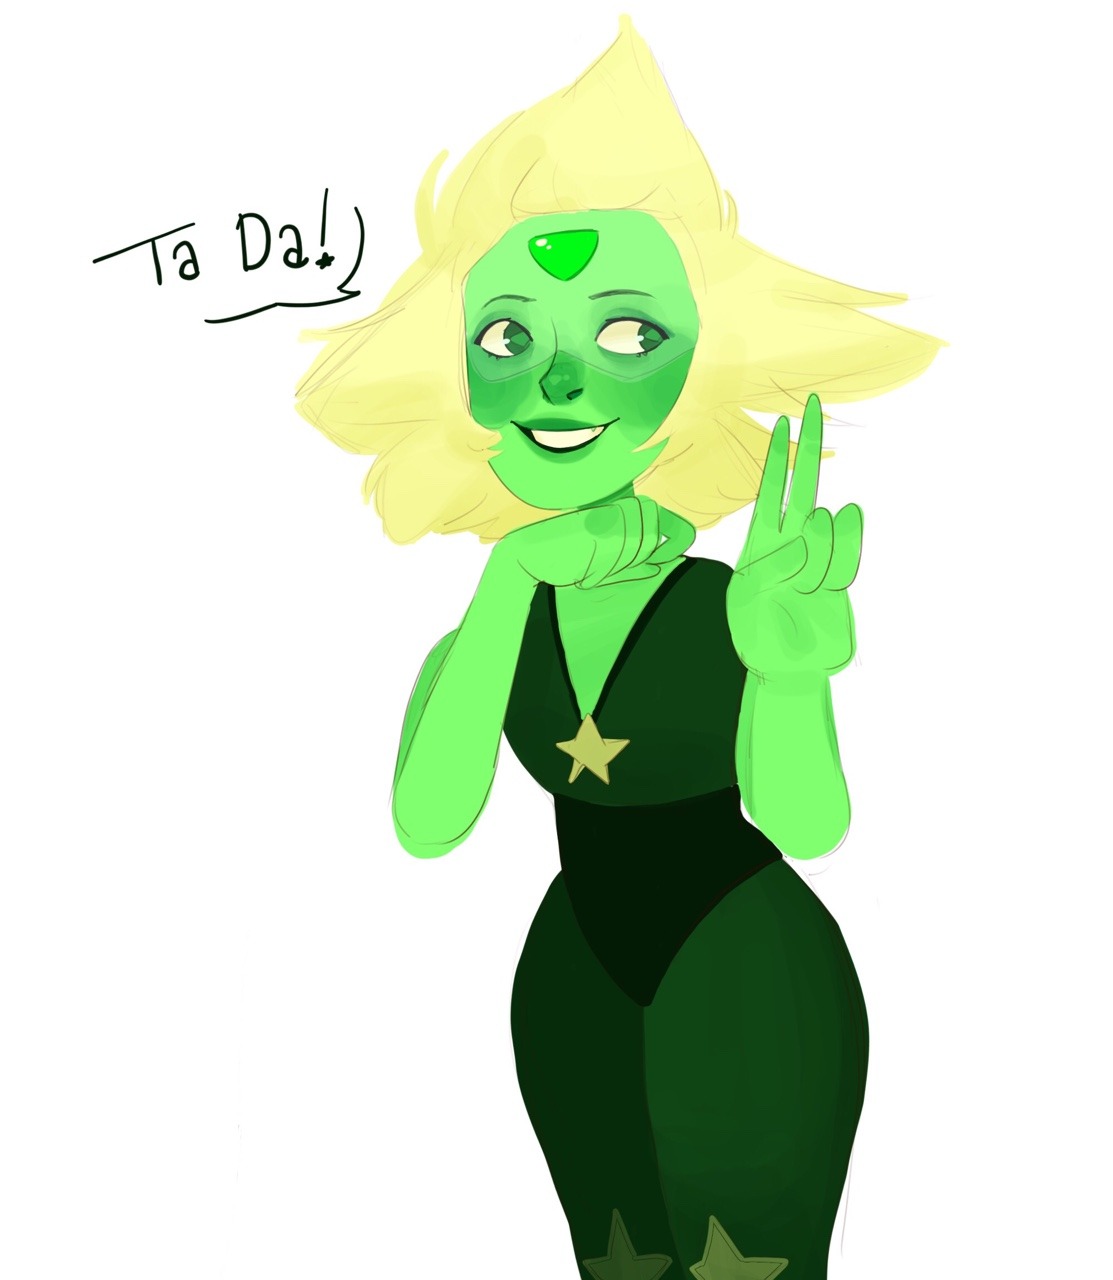 We all can’t wait to see Peri’s new crystal gem look when she reforms right???? I know it’s not just me